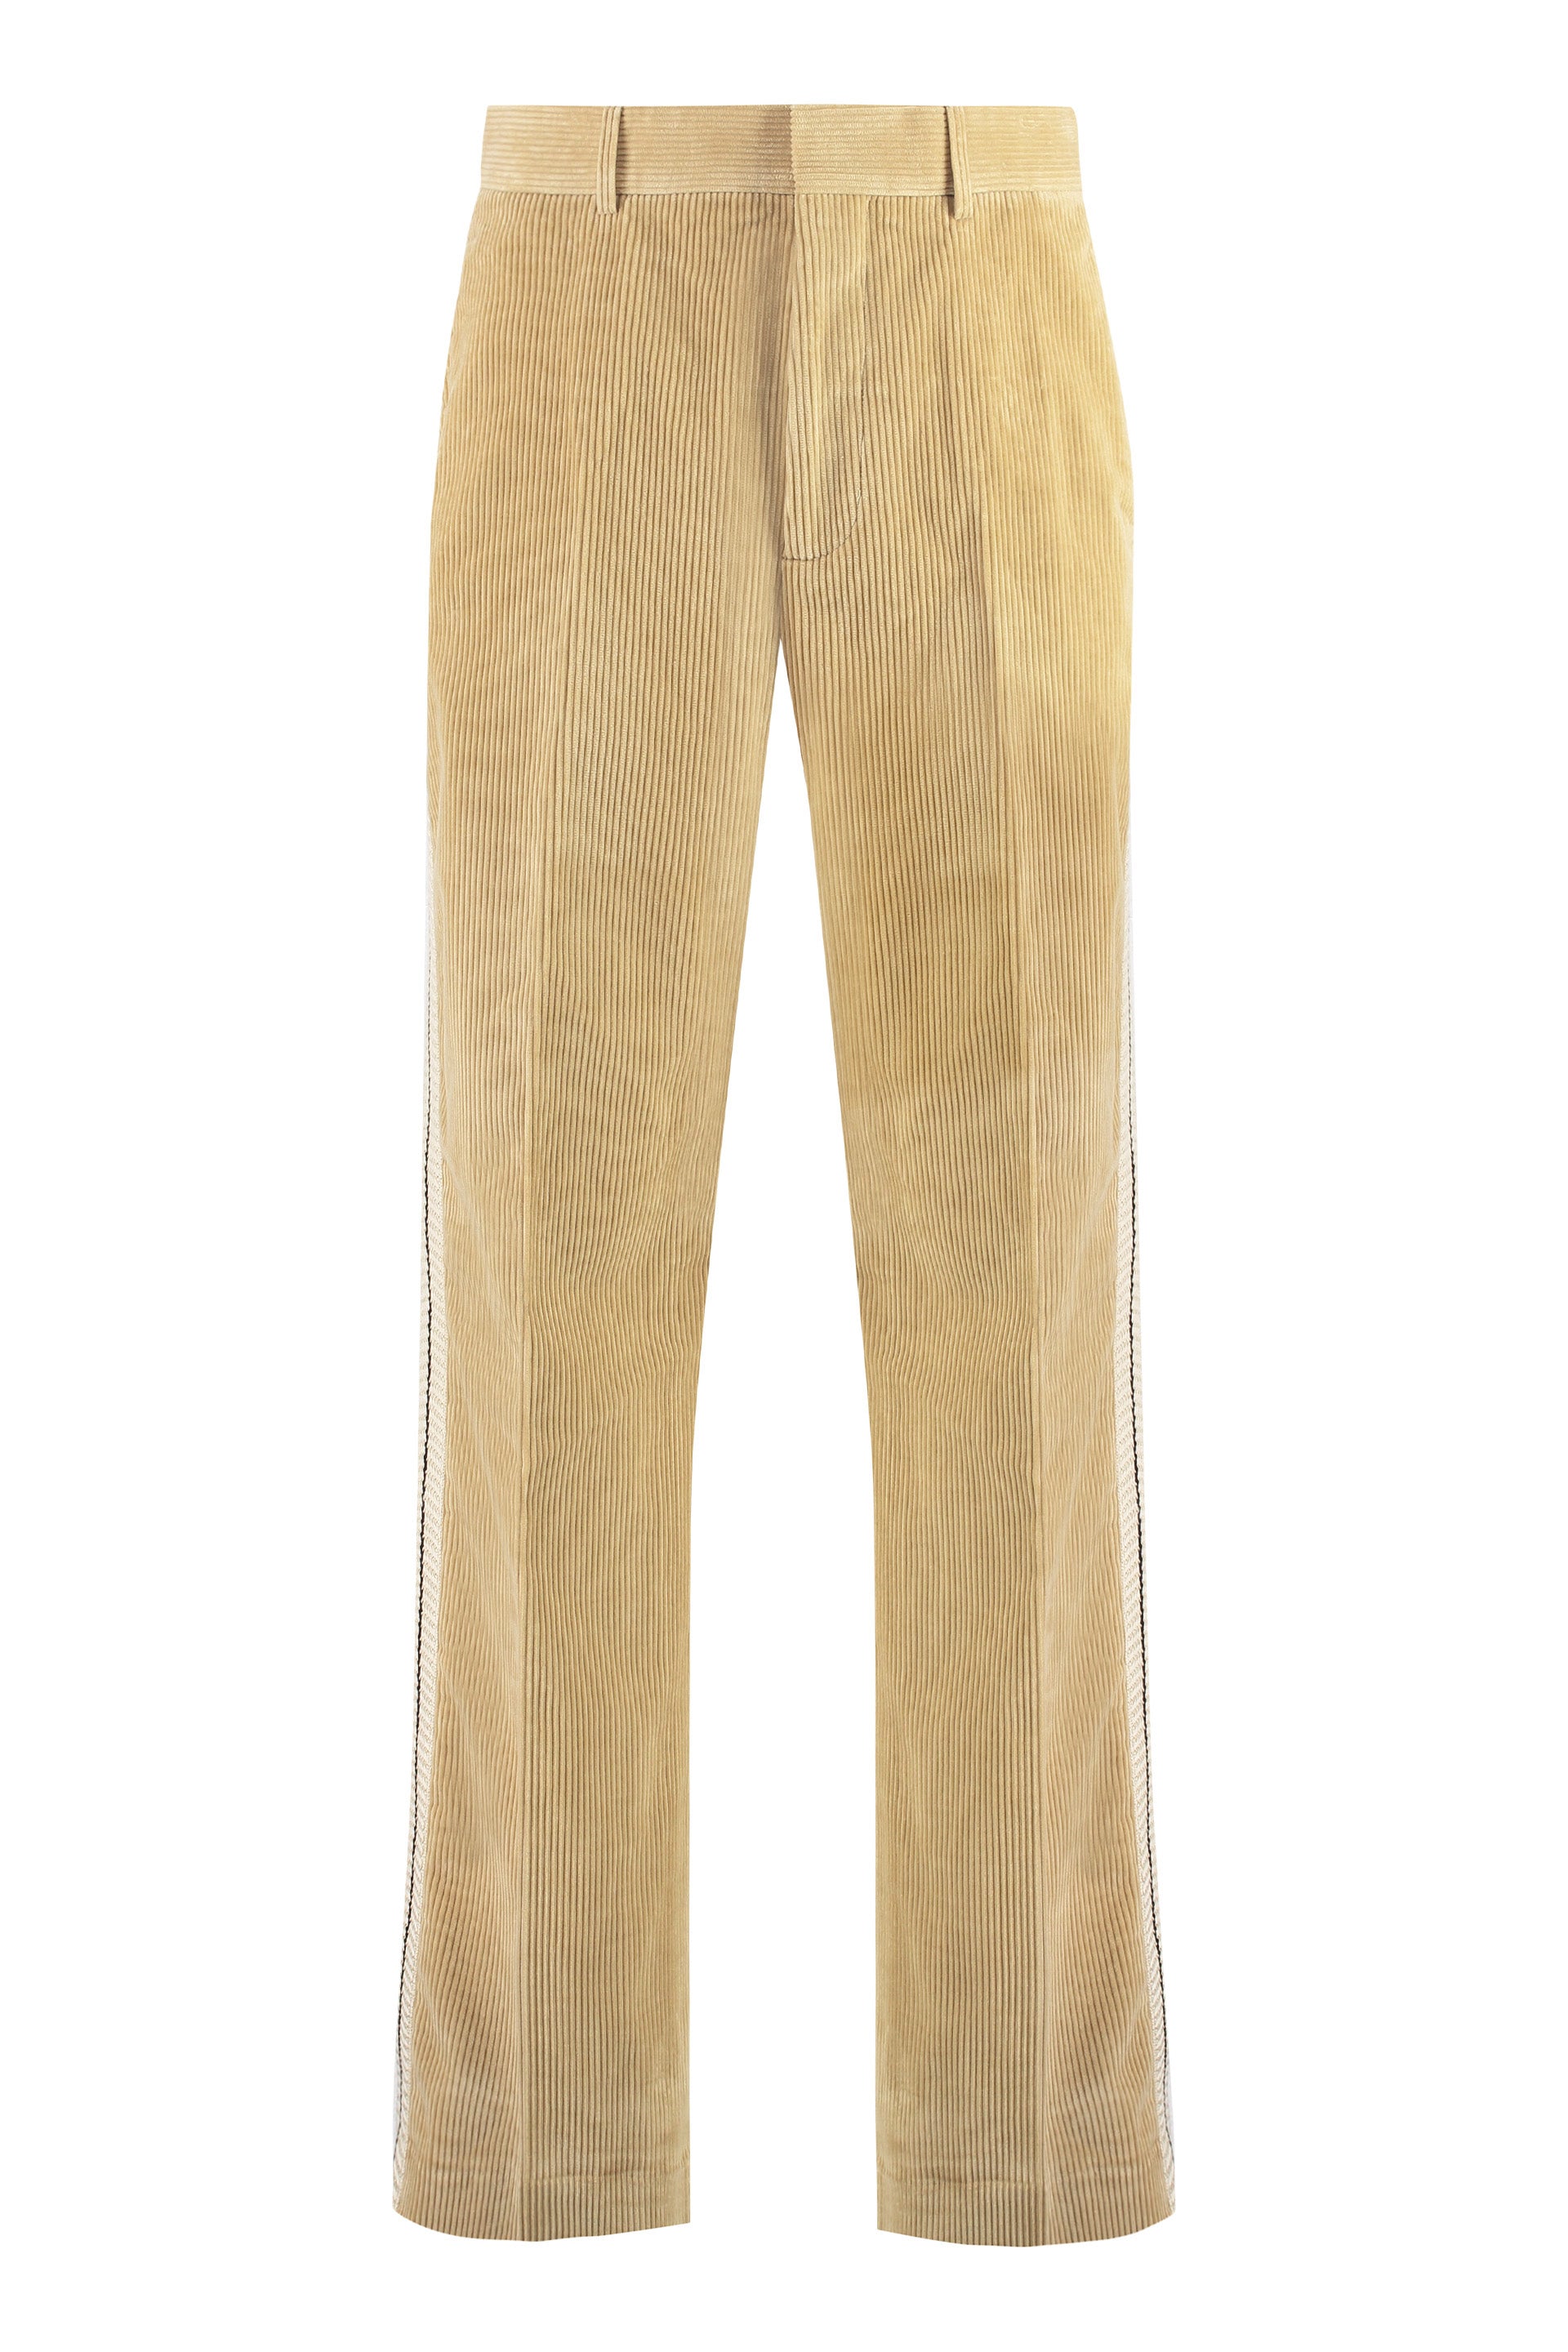 Shop Palm Angels Beige Corduroy Trousers With Contrasting Color Stripe For Men